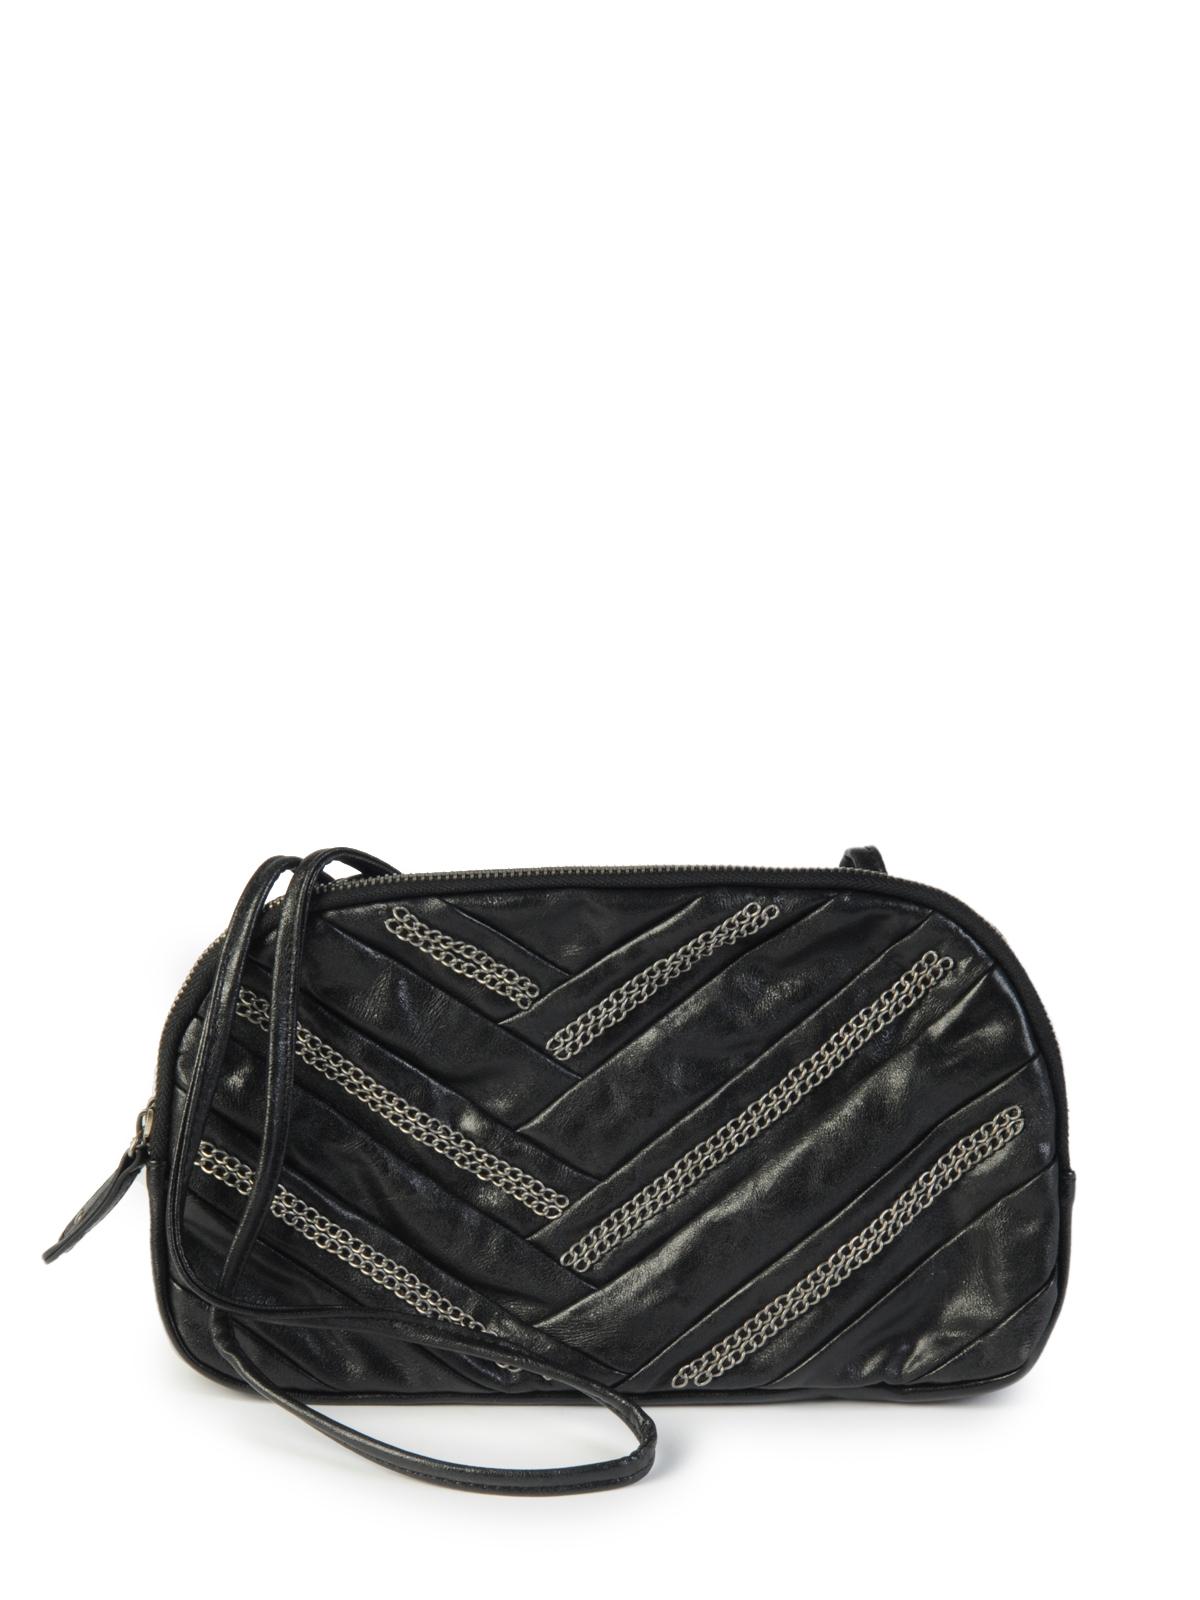 Foto Pepe Jeans Bolso negro ONE SIZE